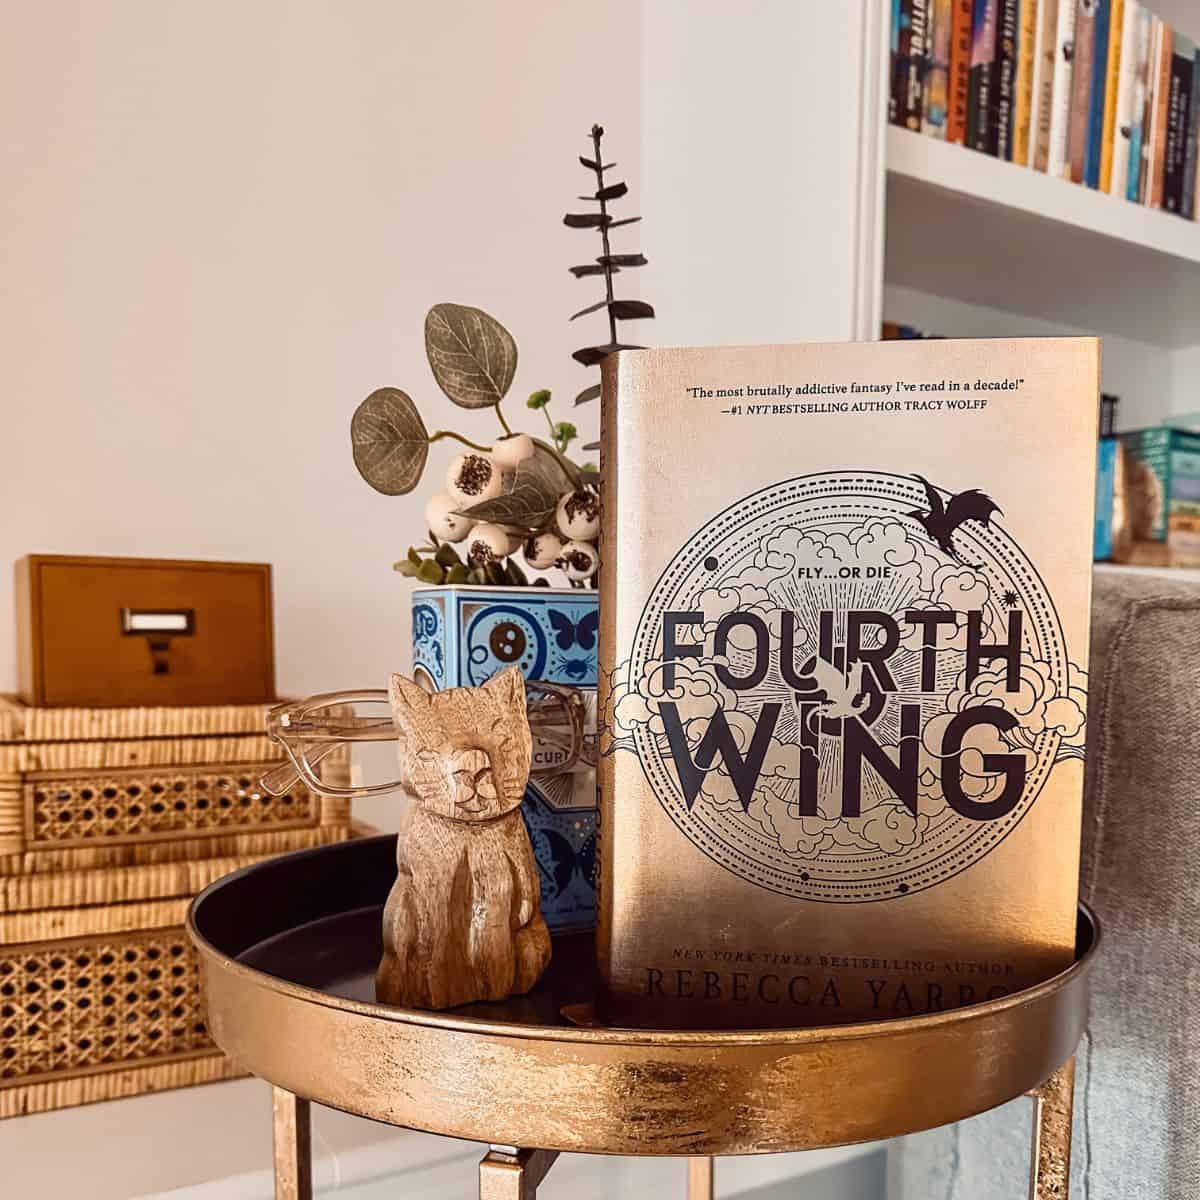 Fourth Wing by Rebecca Yarros: Full Summary & Review